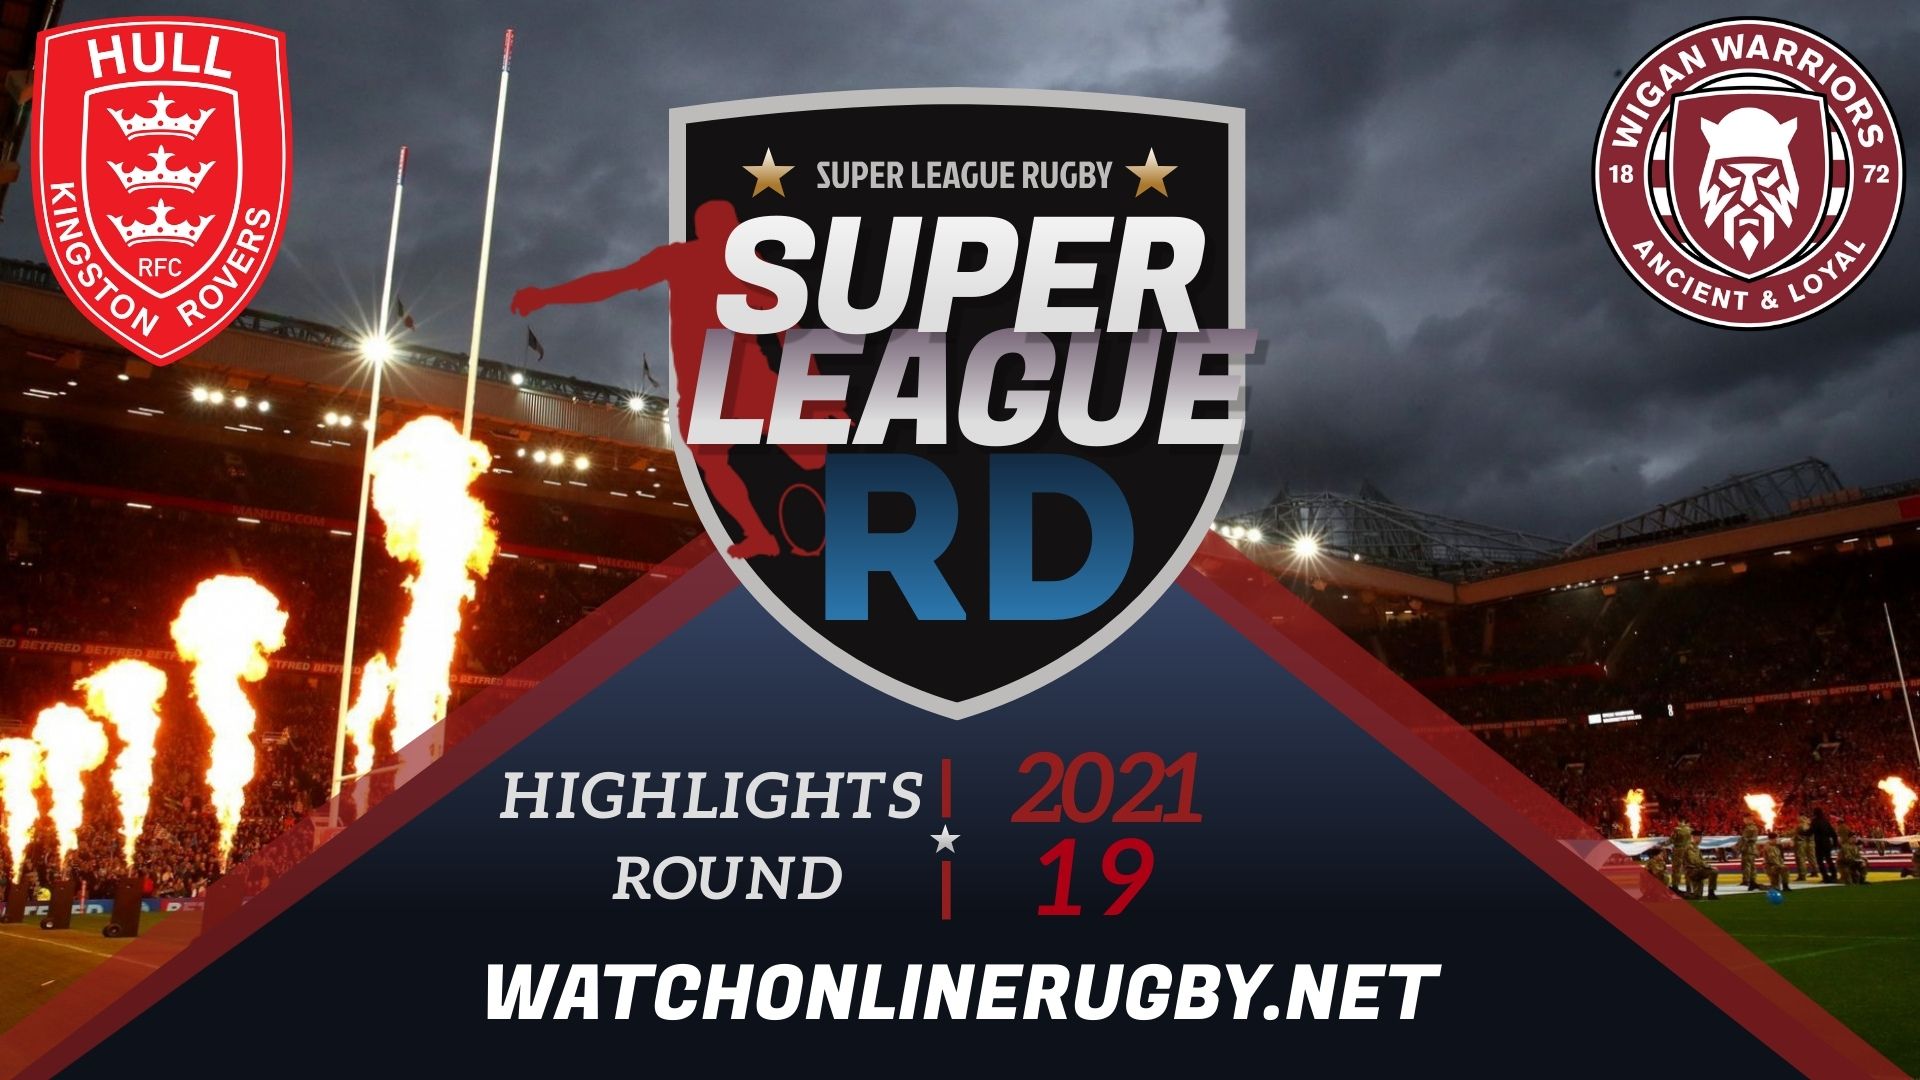 Hull KR Vs Wigan Warriors Super League Rugby 2021 RD 19